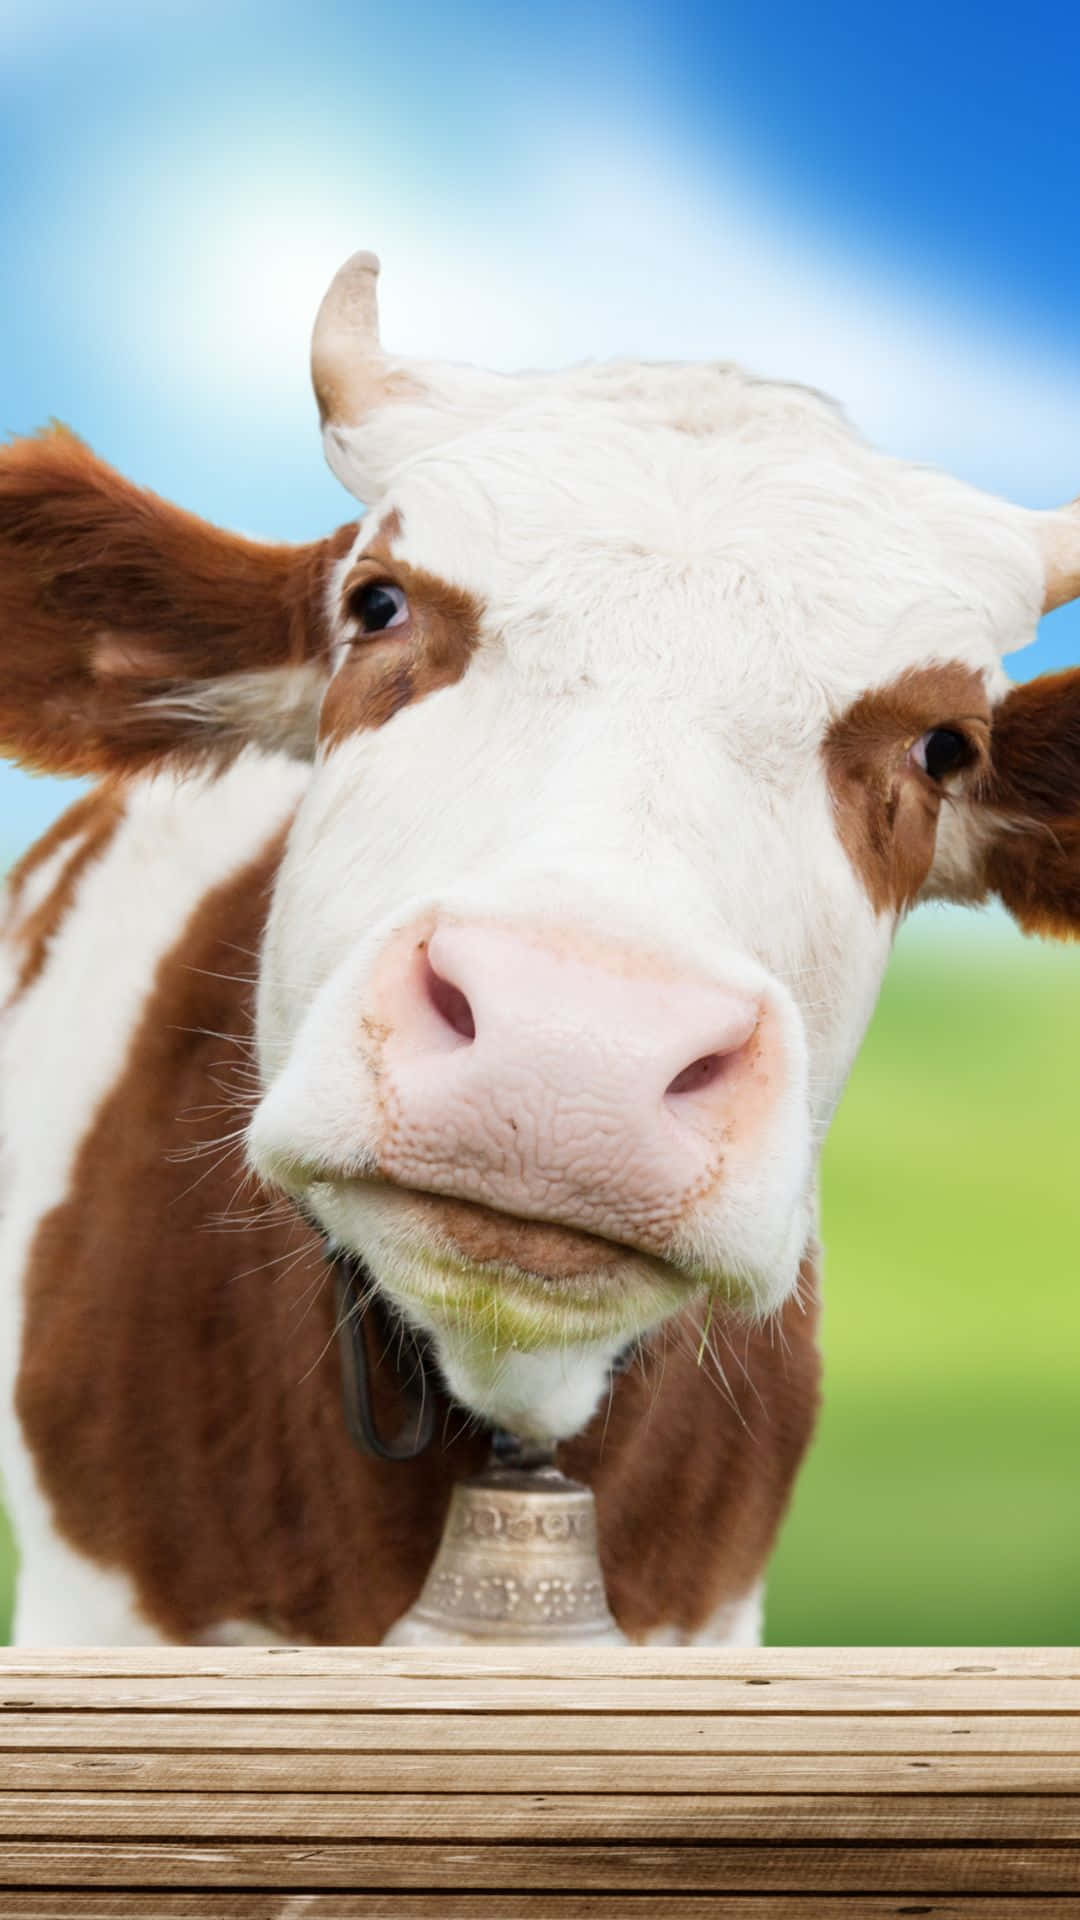 Enjoy the beauty of cows with the revolutionary Cow Iphone Wallpaper